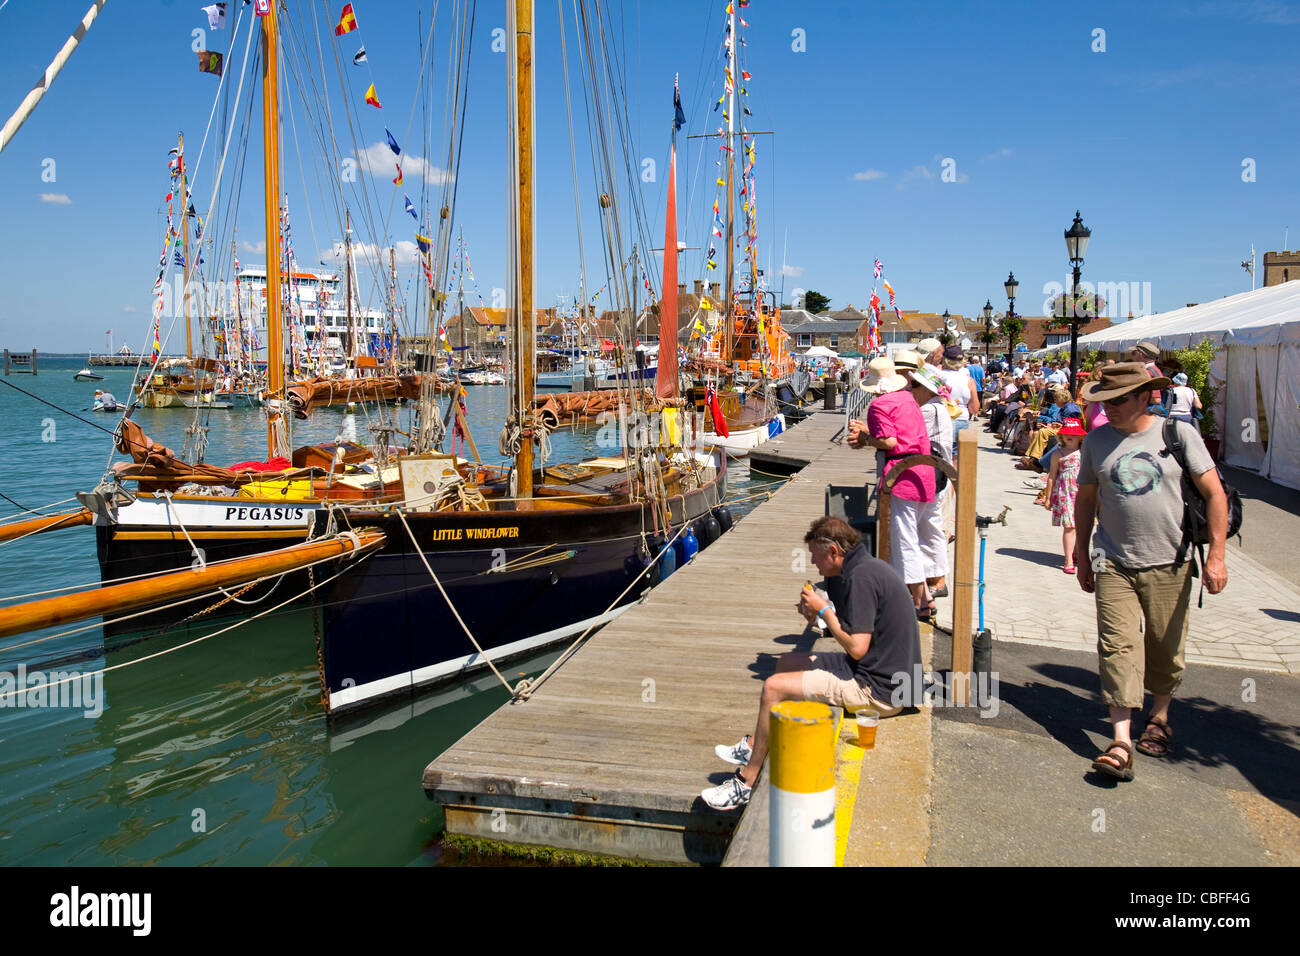 Old Gaffer, Classic Boat, Yachts, Boats, Harbour, Yarmouth, Isle of Wight, England, UK Stock Photo